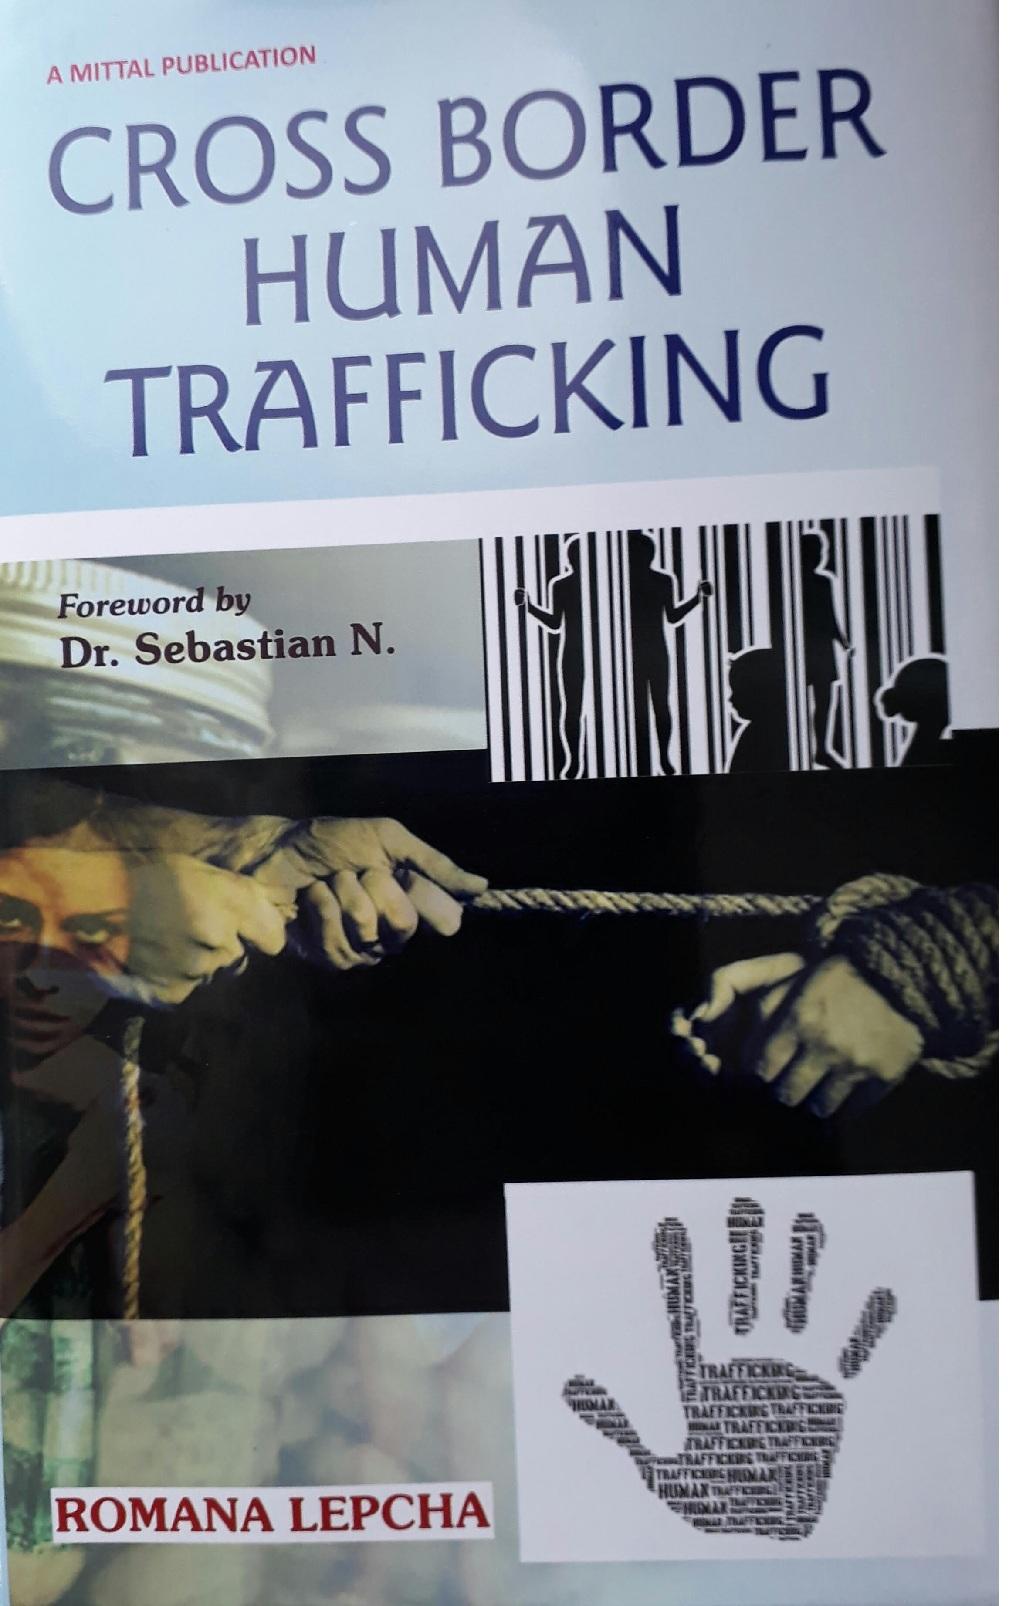 Cross Border Human Trafficking is by Dr Romana Lepcha